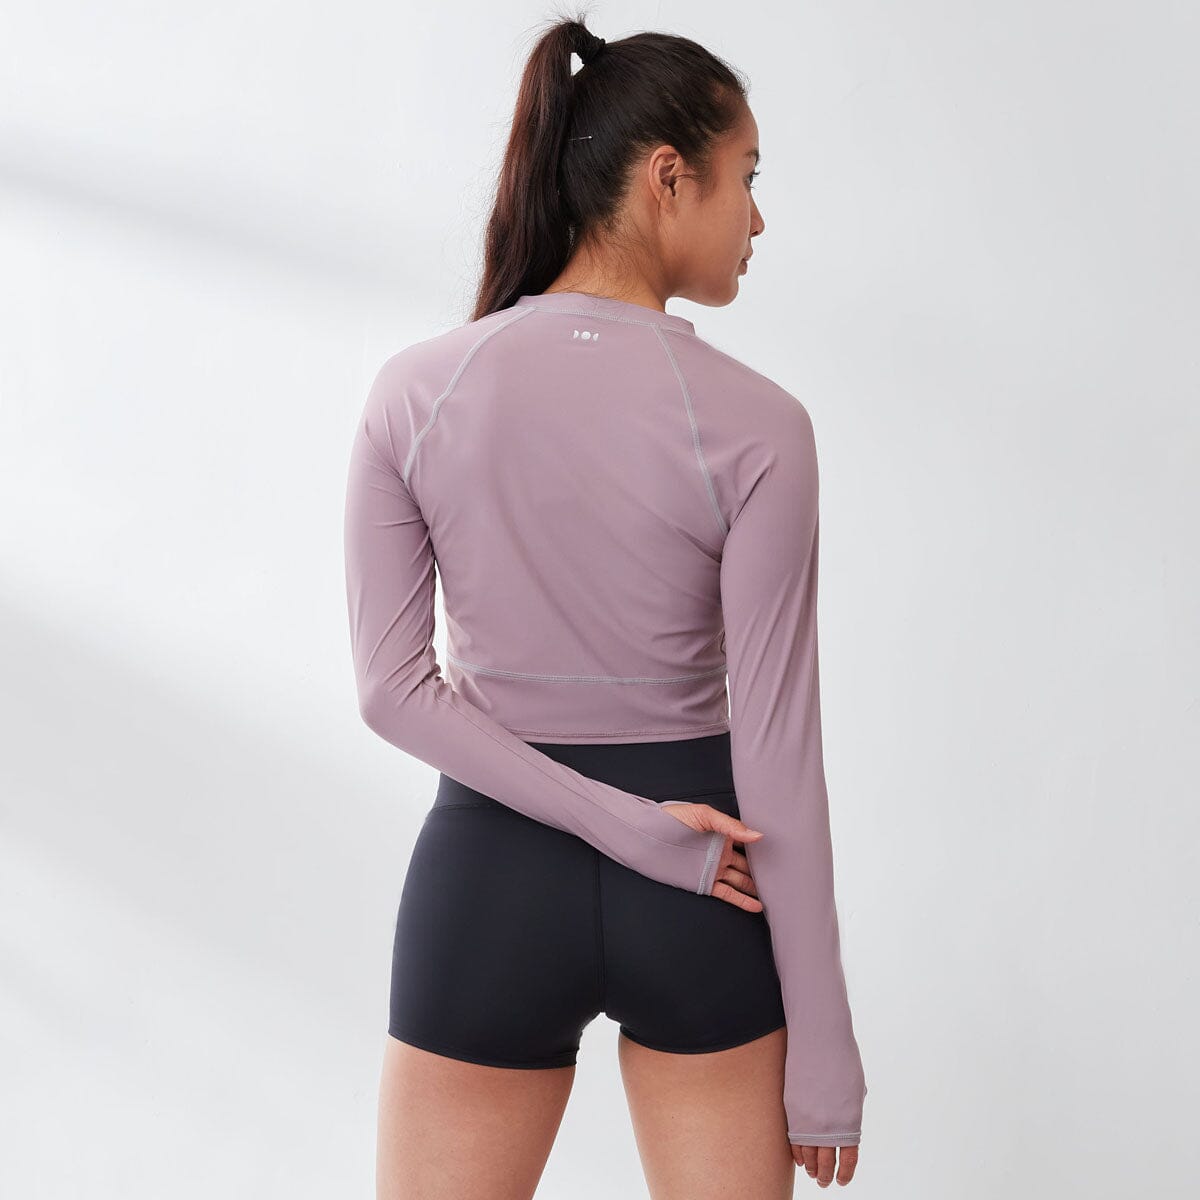 Aqua UV Protection Cropped Jacket Tops Her own words SPORTS 